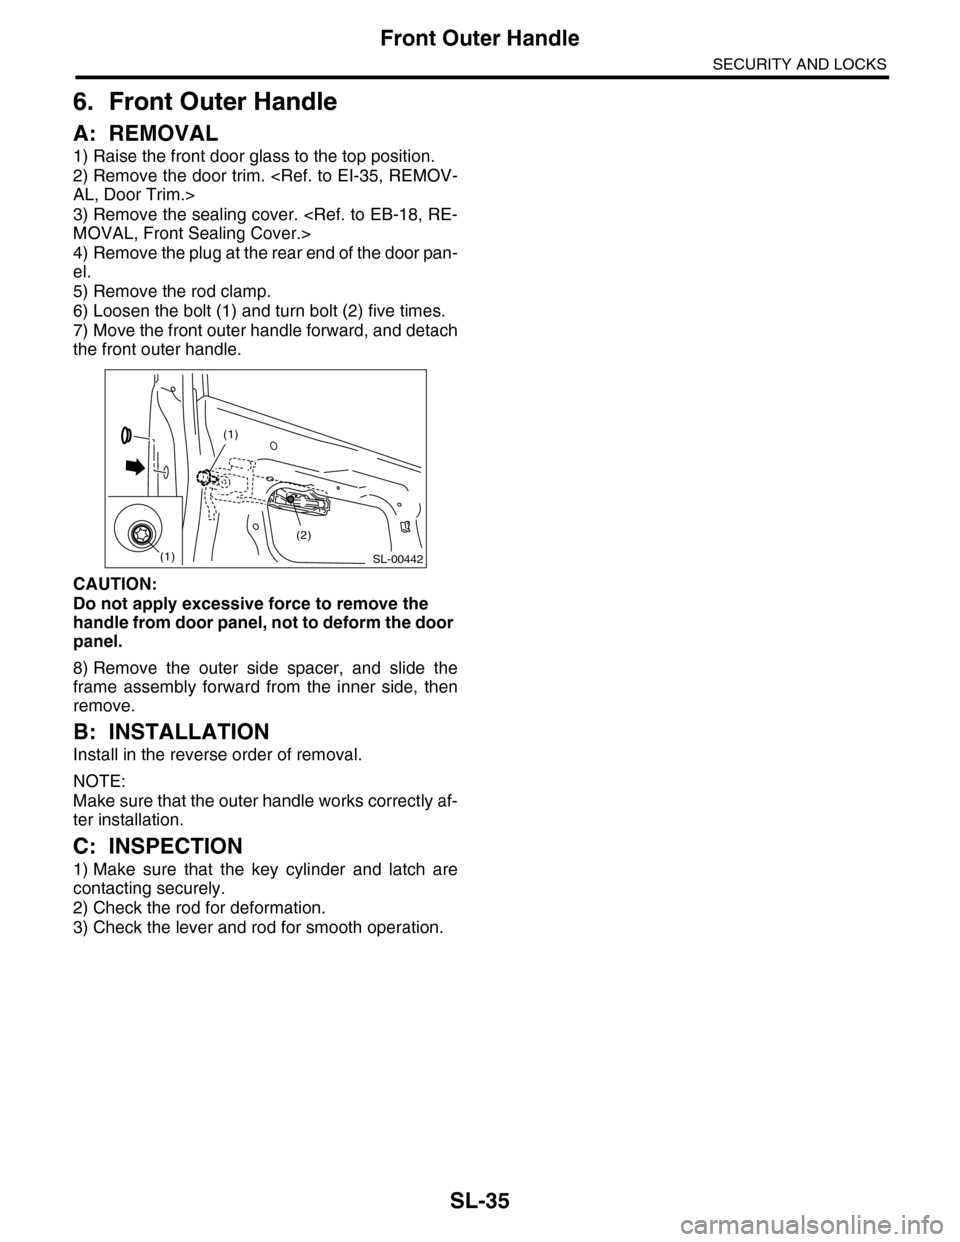 SUBARU TRIBECA 2009 1.G Service Workshop Manual SL-35
Front Outer Handle
SECURITY AND LOCKS
6. Front Outer Handle
A: REMOVAL
1) Raise the front door glass to the top position.
2) Remove the door trim. <Ref. to EI-35, REMOV-
AL, Door Trim.> 
3) Remo